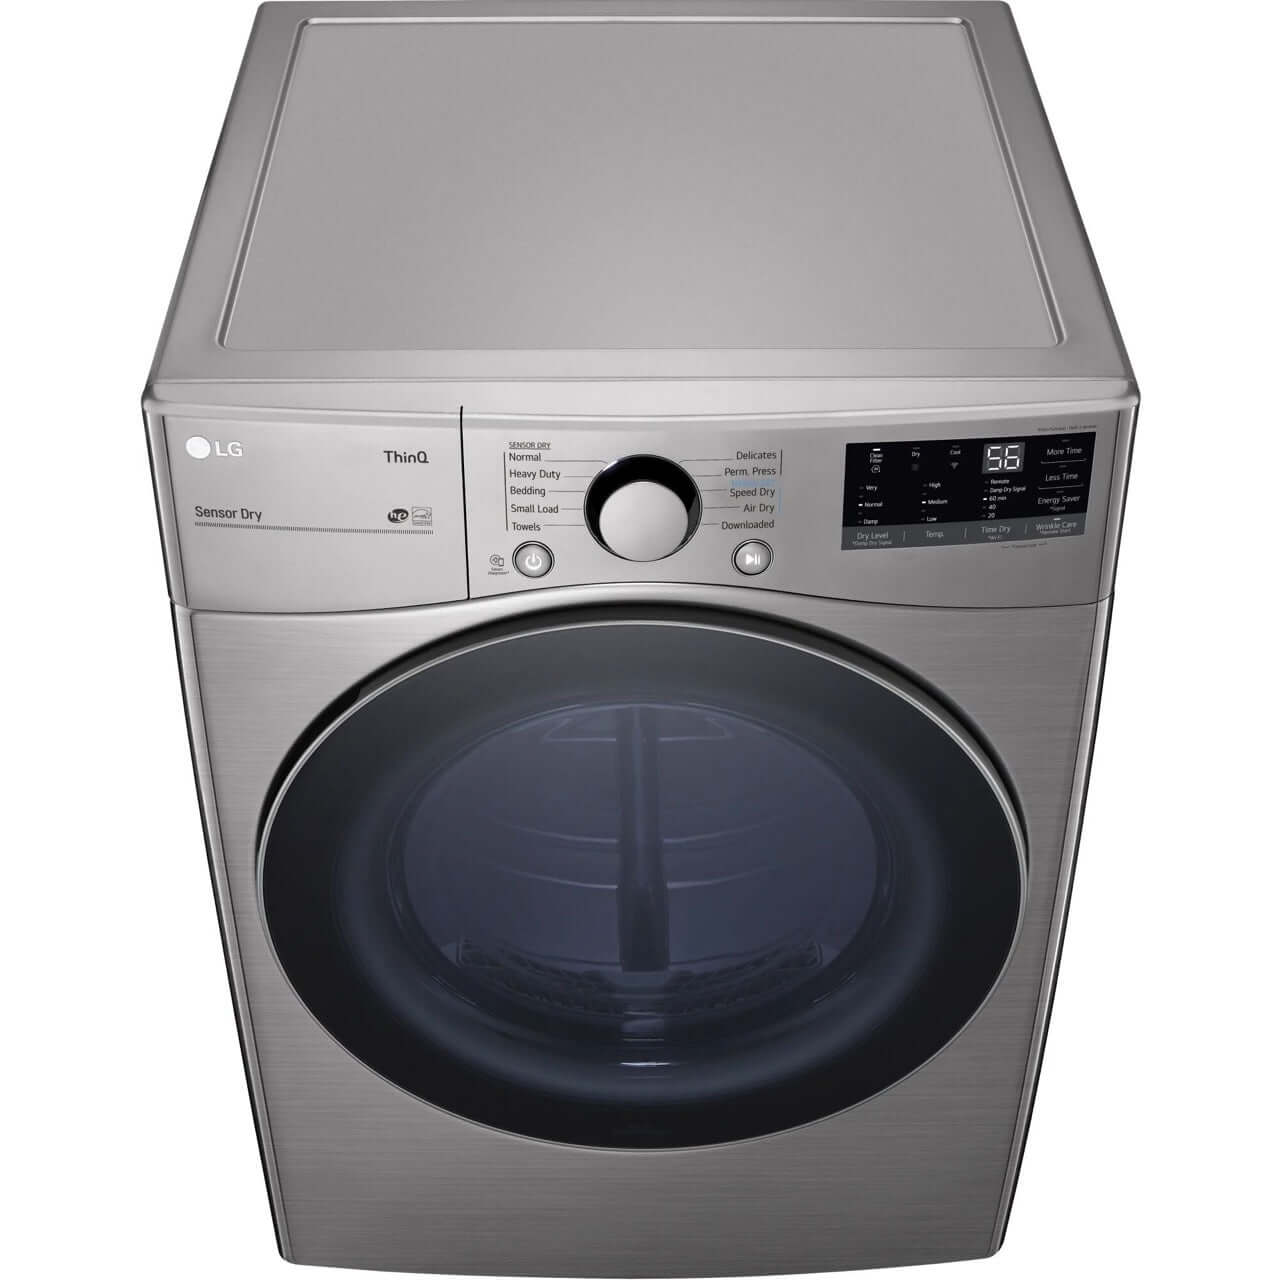 LG 27 In. 7.4-Cu. Ft. Front Load Gas Dryer with Built-In Intelligence in Graphite Steel (DLG3601V)